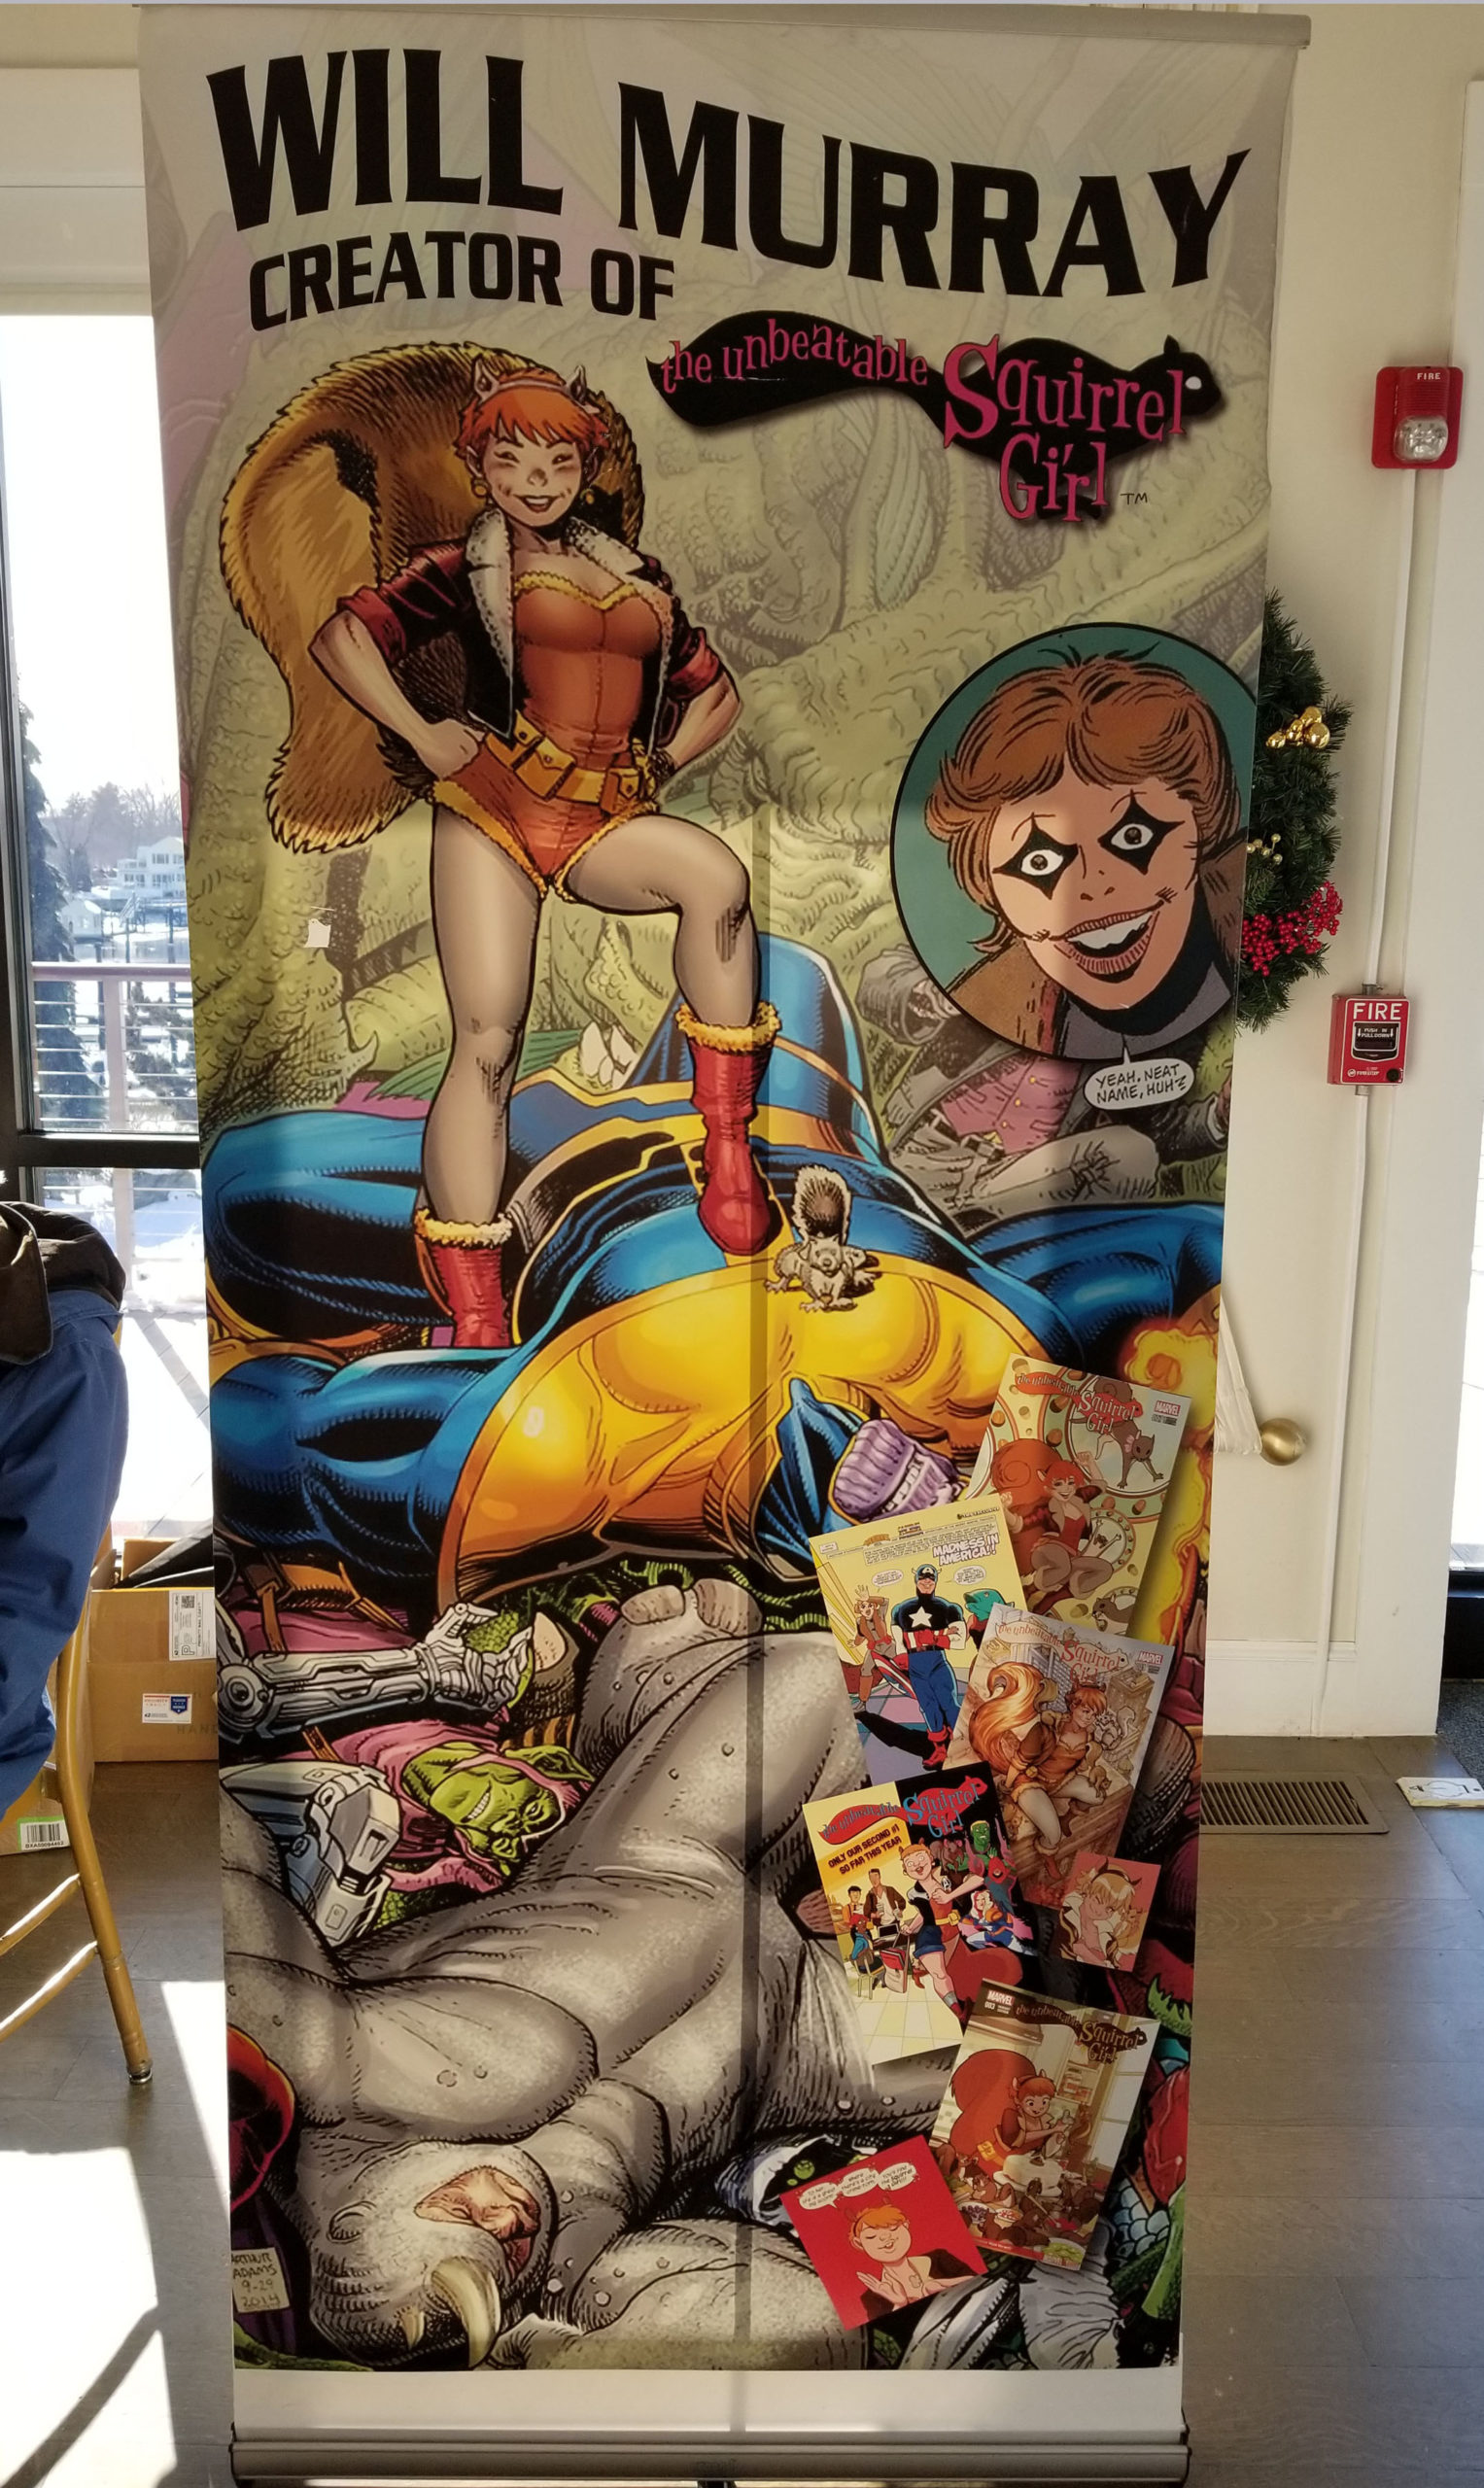 Will Murry co-creator of Squirrel Girl